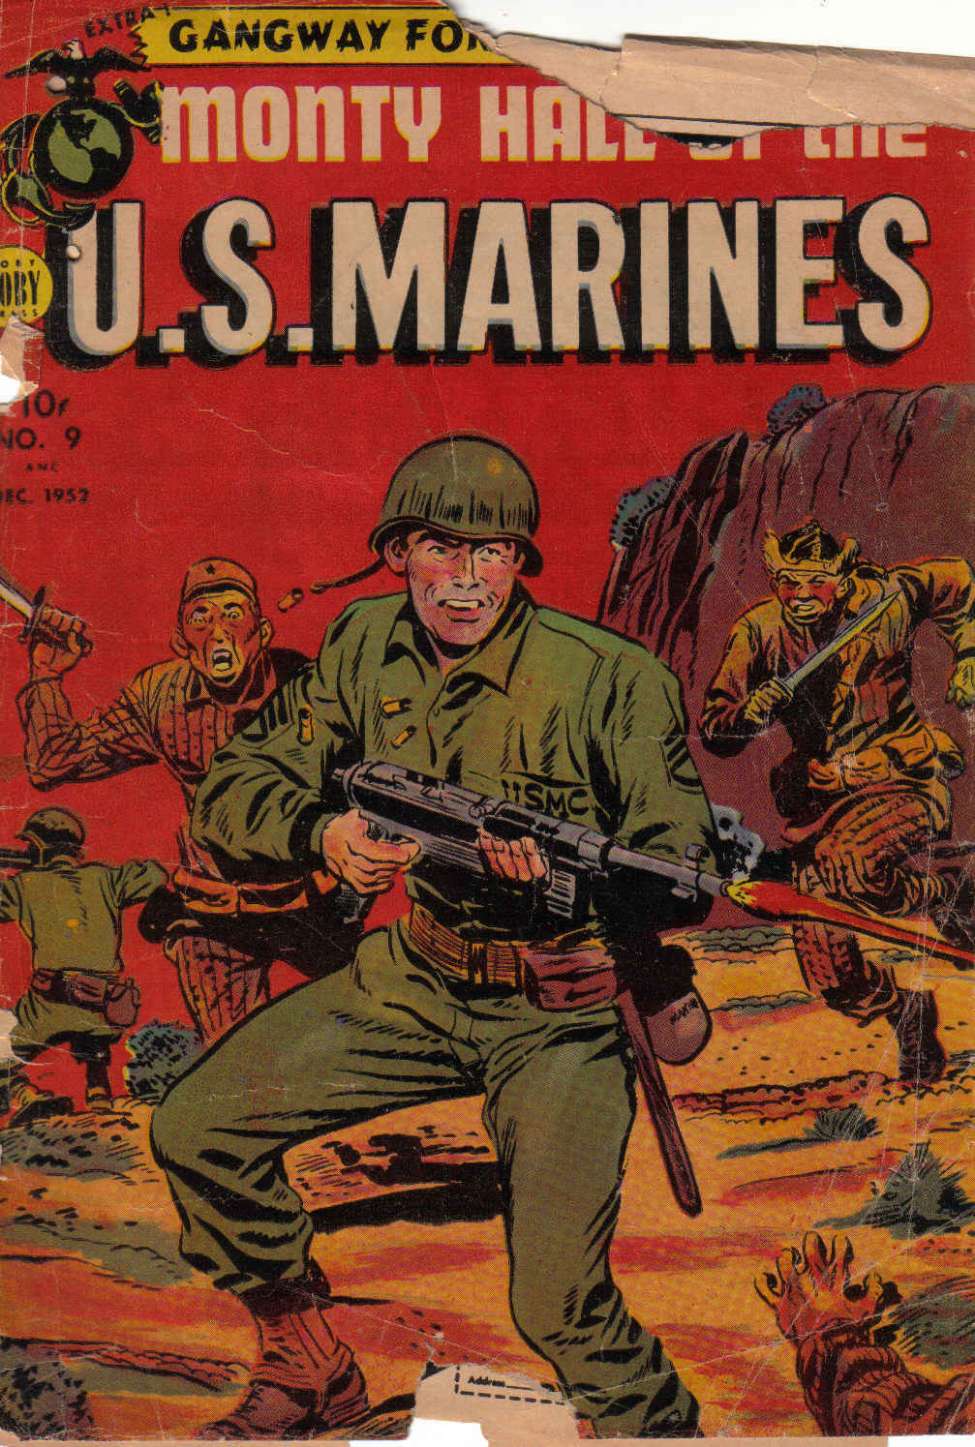 Book Cover For Monty Hall of the U.S. Marines 9